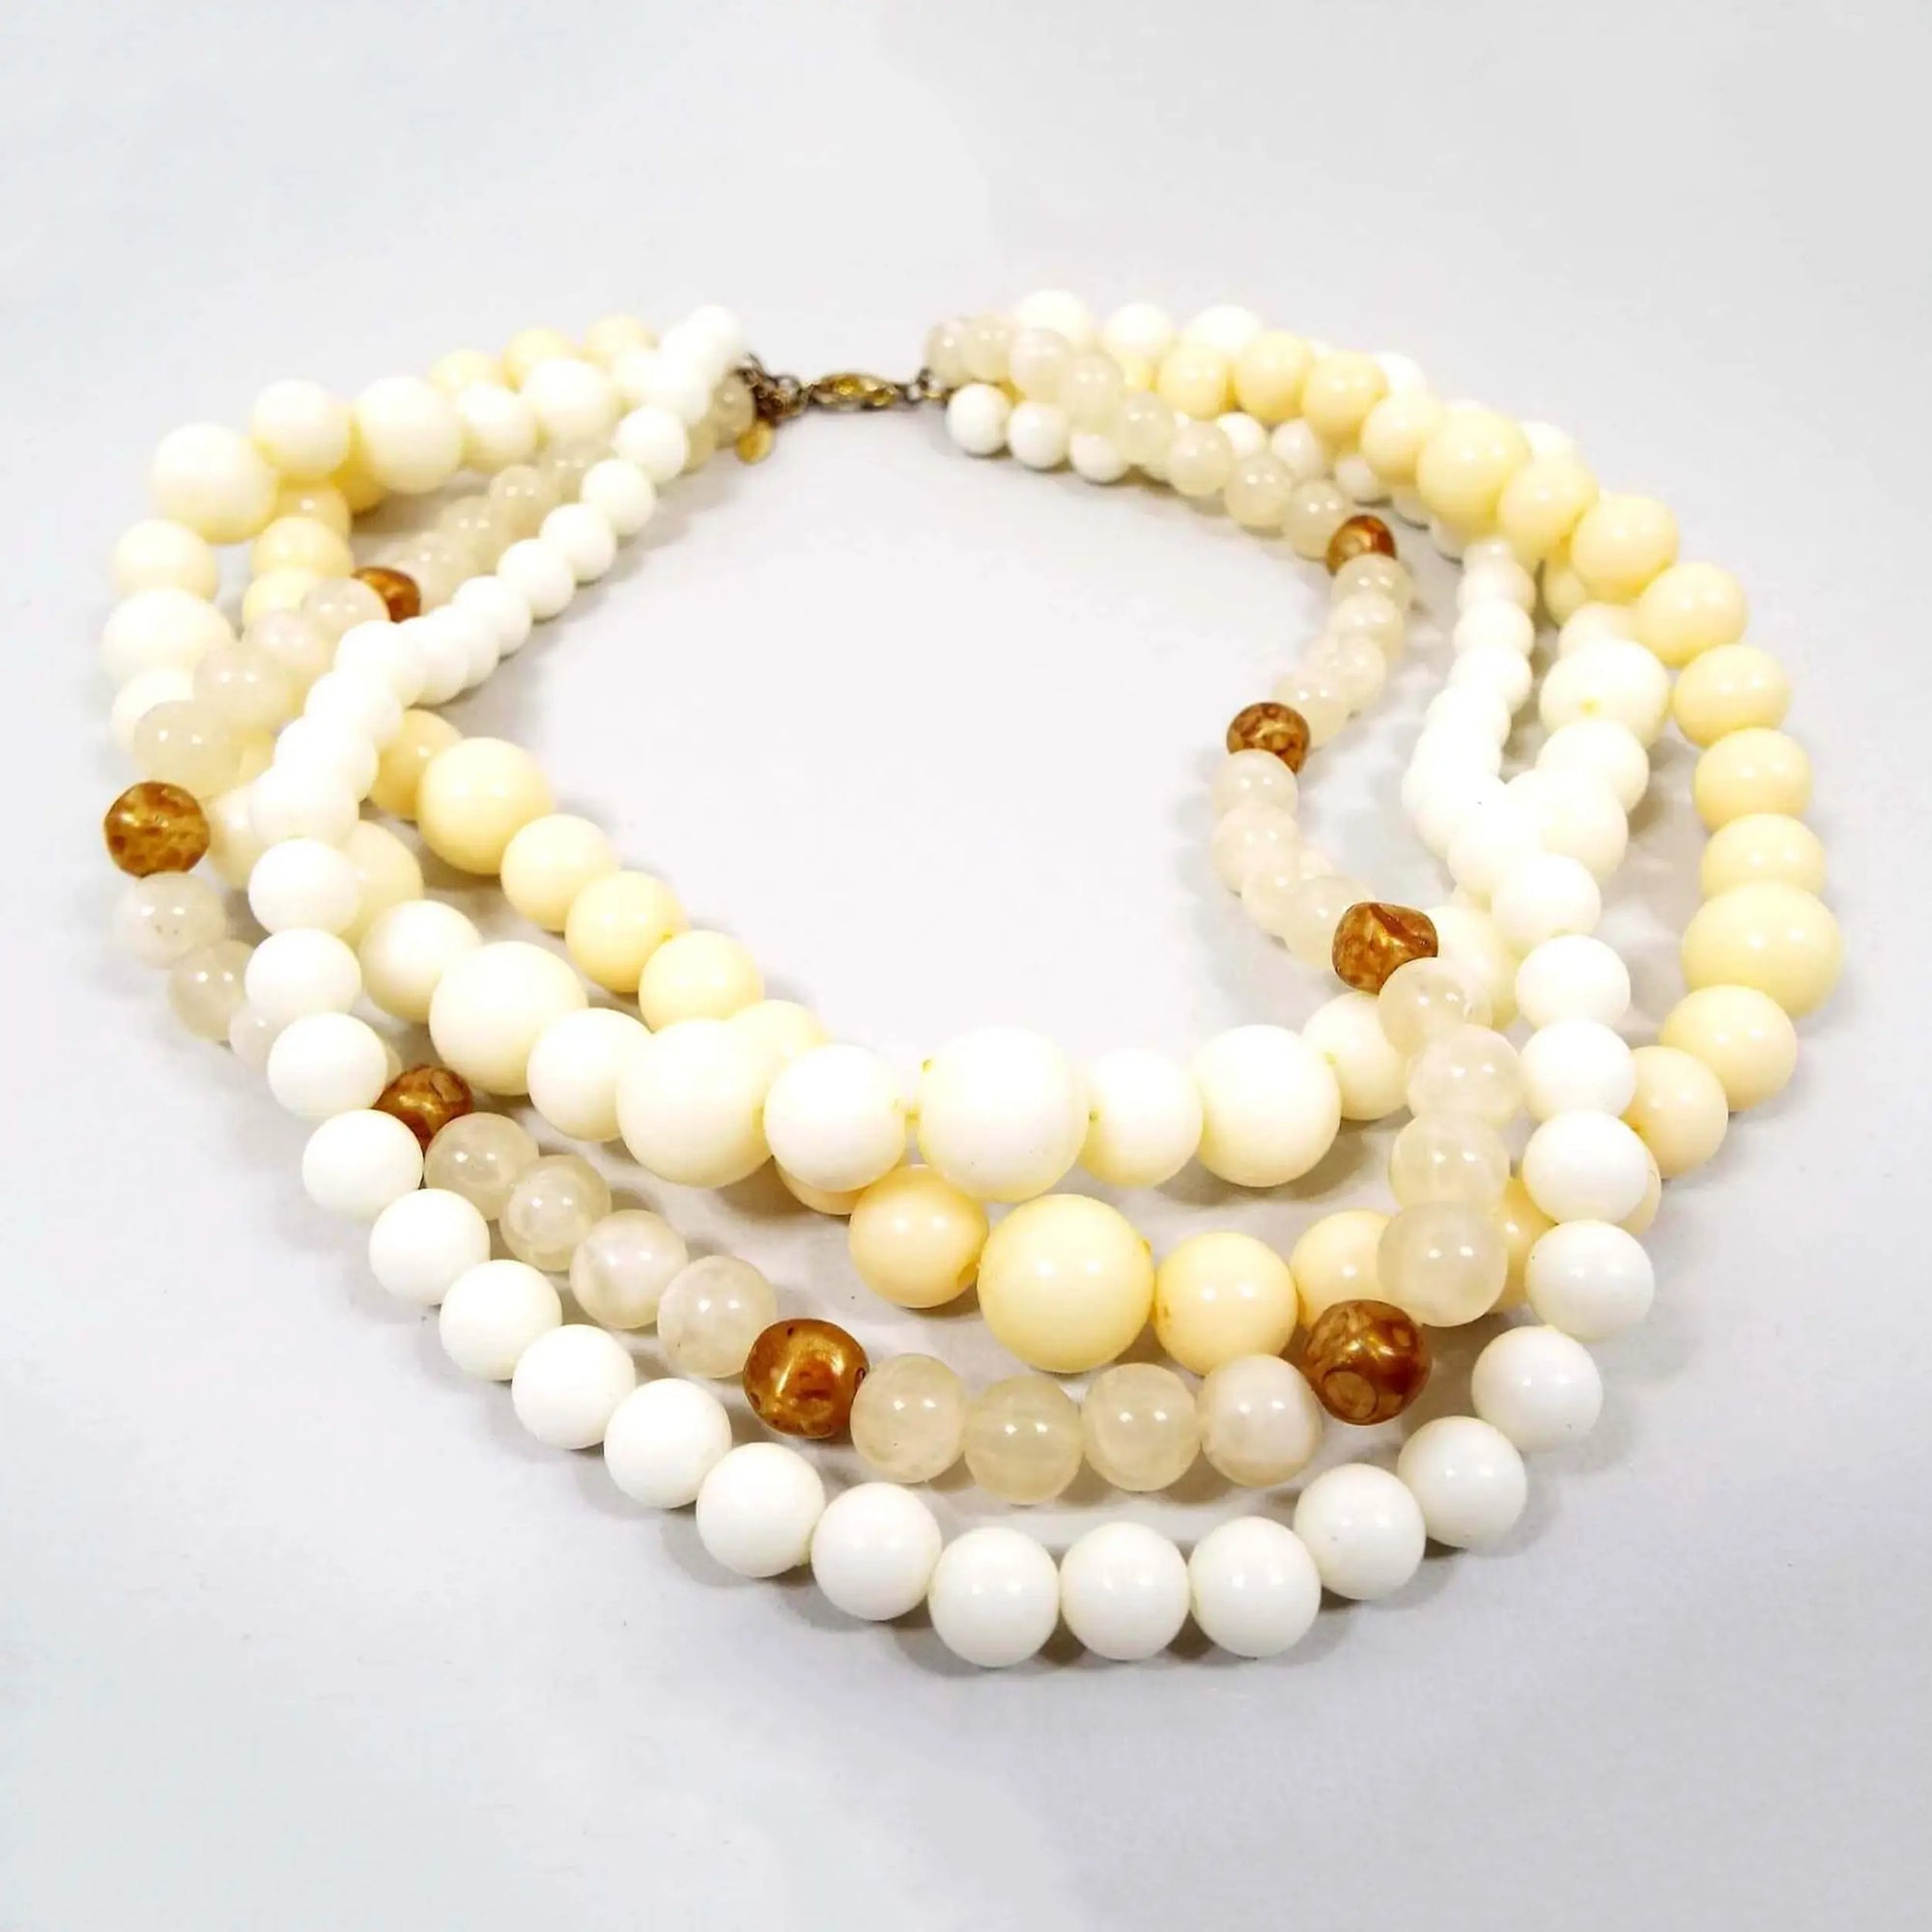 Front view of the retro vintage EsMor multi strand necklace. It is beaded with lucite round beads in white, cream, light yellow, and a marbled golden color.